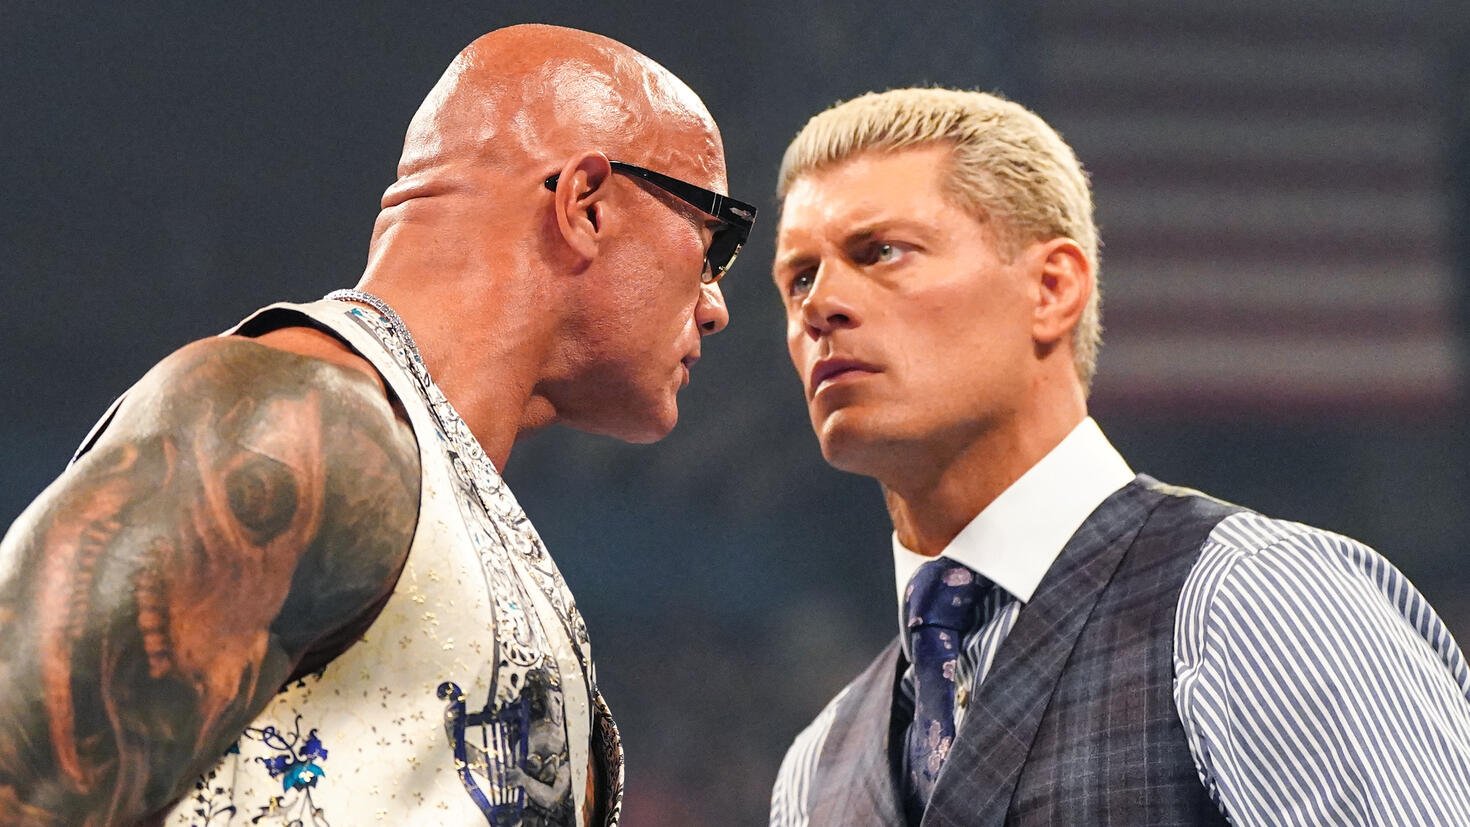 Suggestion: “Nic Nemeth suggests Cody Rhodes should engage in a personal feud with The Rock”